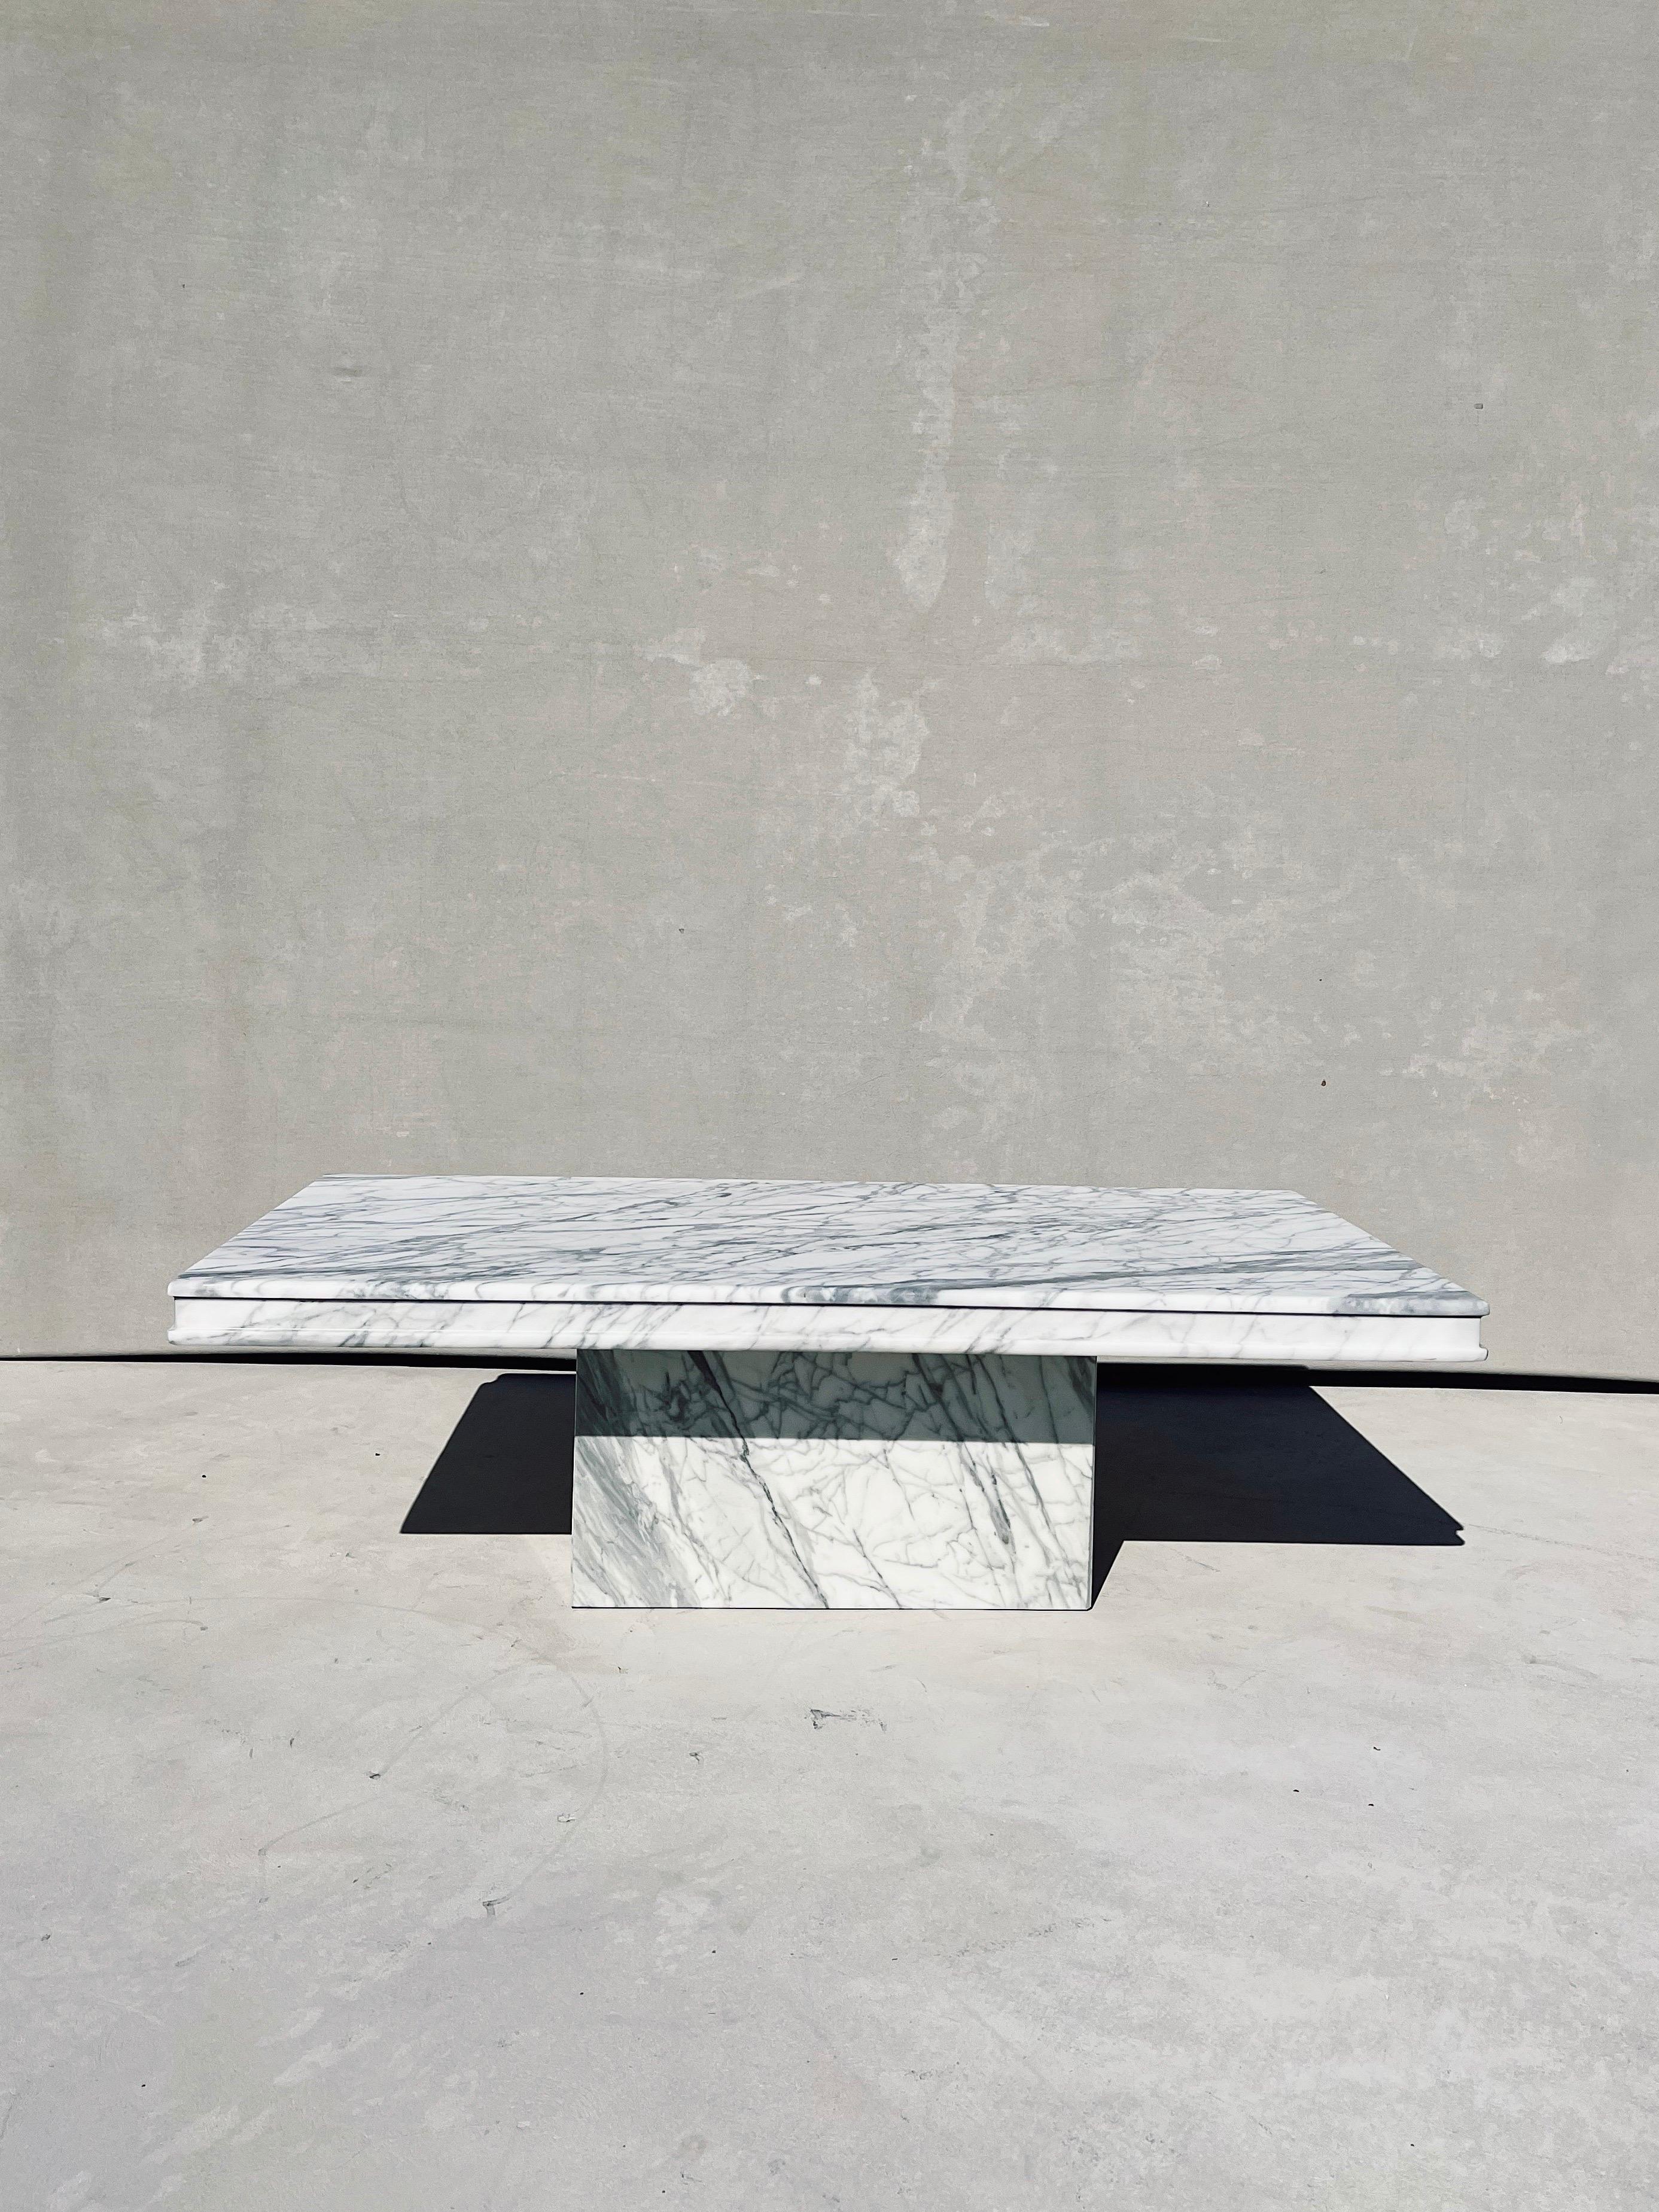 Vintage Italian carrara marble rectangular coffee table

Carrara marble is one of the oldest marbles in the world. It is simple, sophisticated and elegant. 

Designed and created in the 1970s, this vintage coffee table stands up to all modern